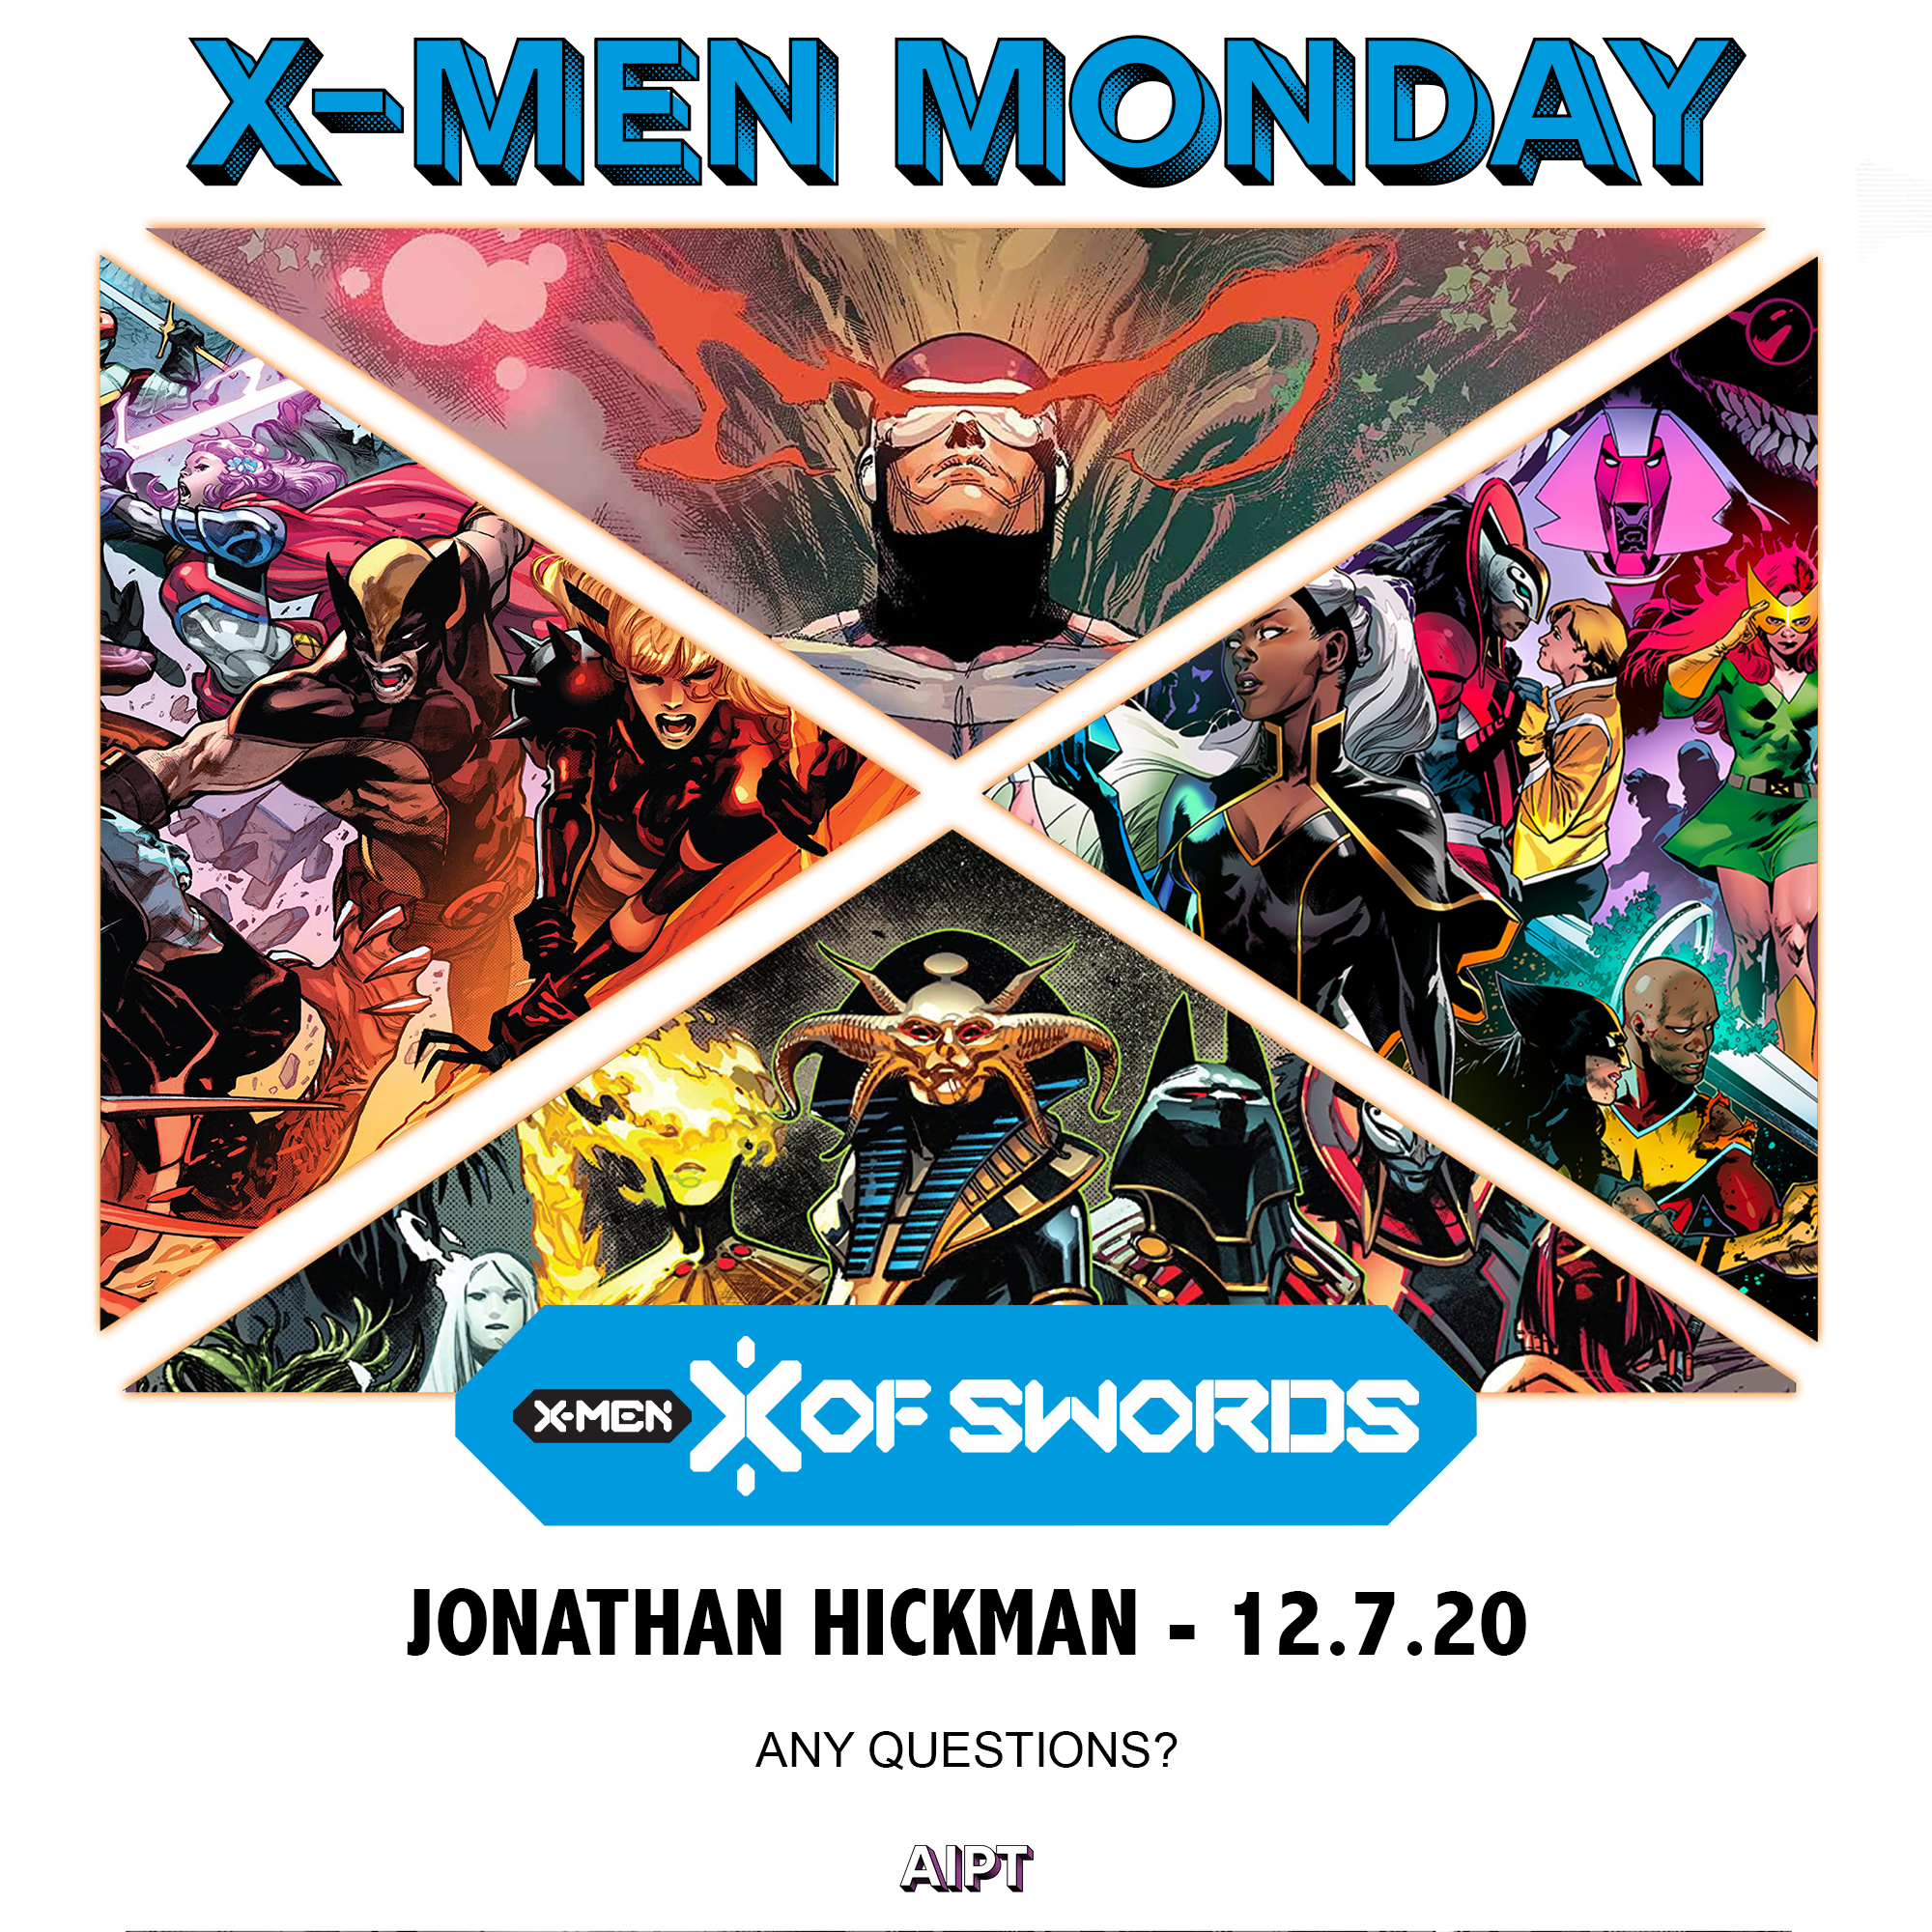 X-Men Monday Call for Questions - Jonathan Hickman